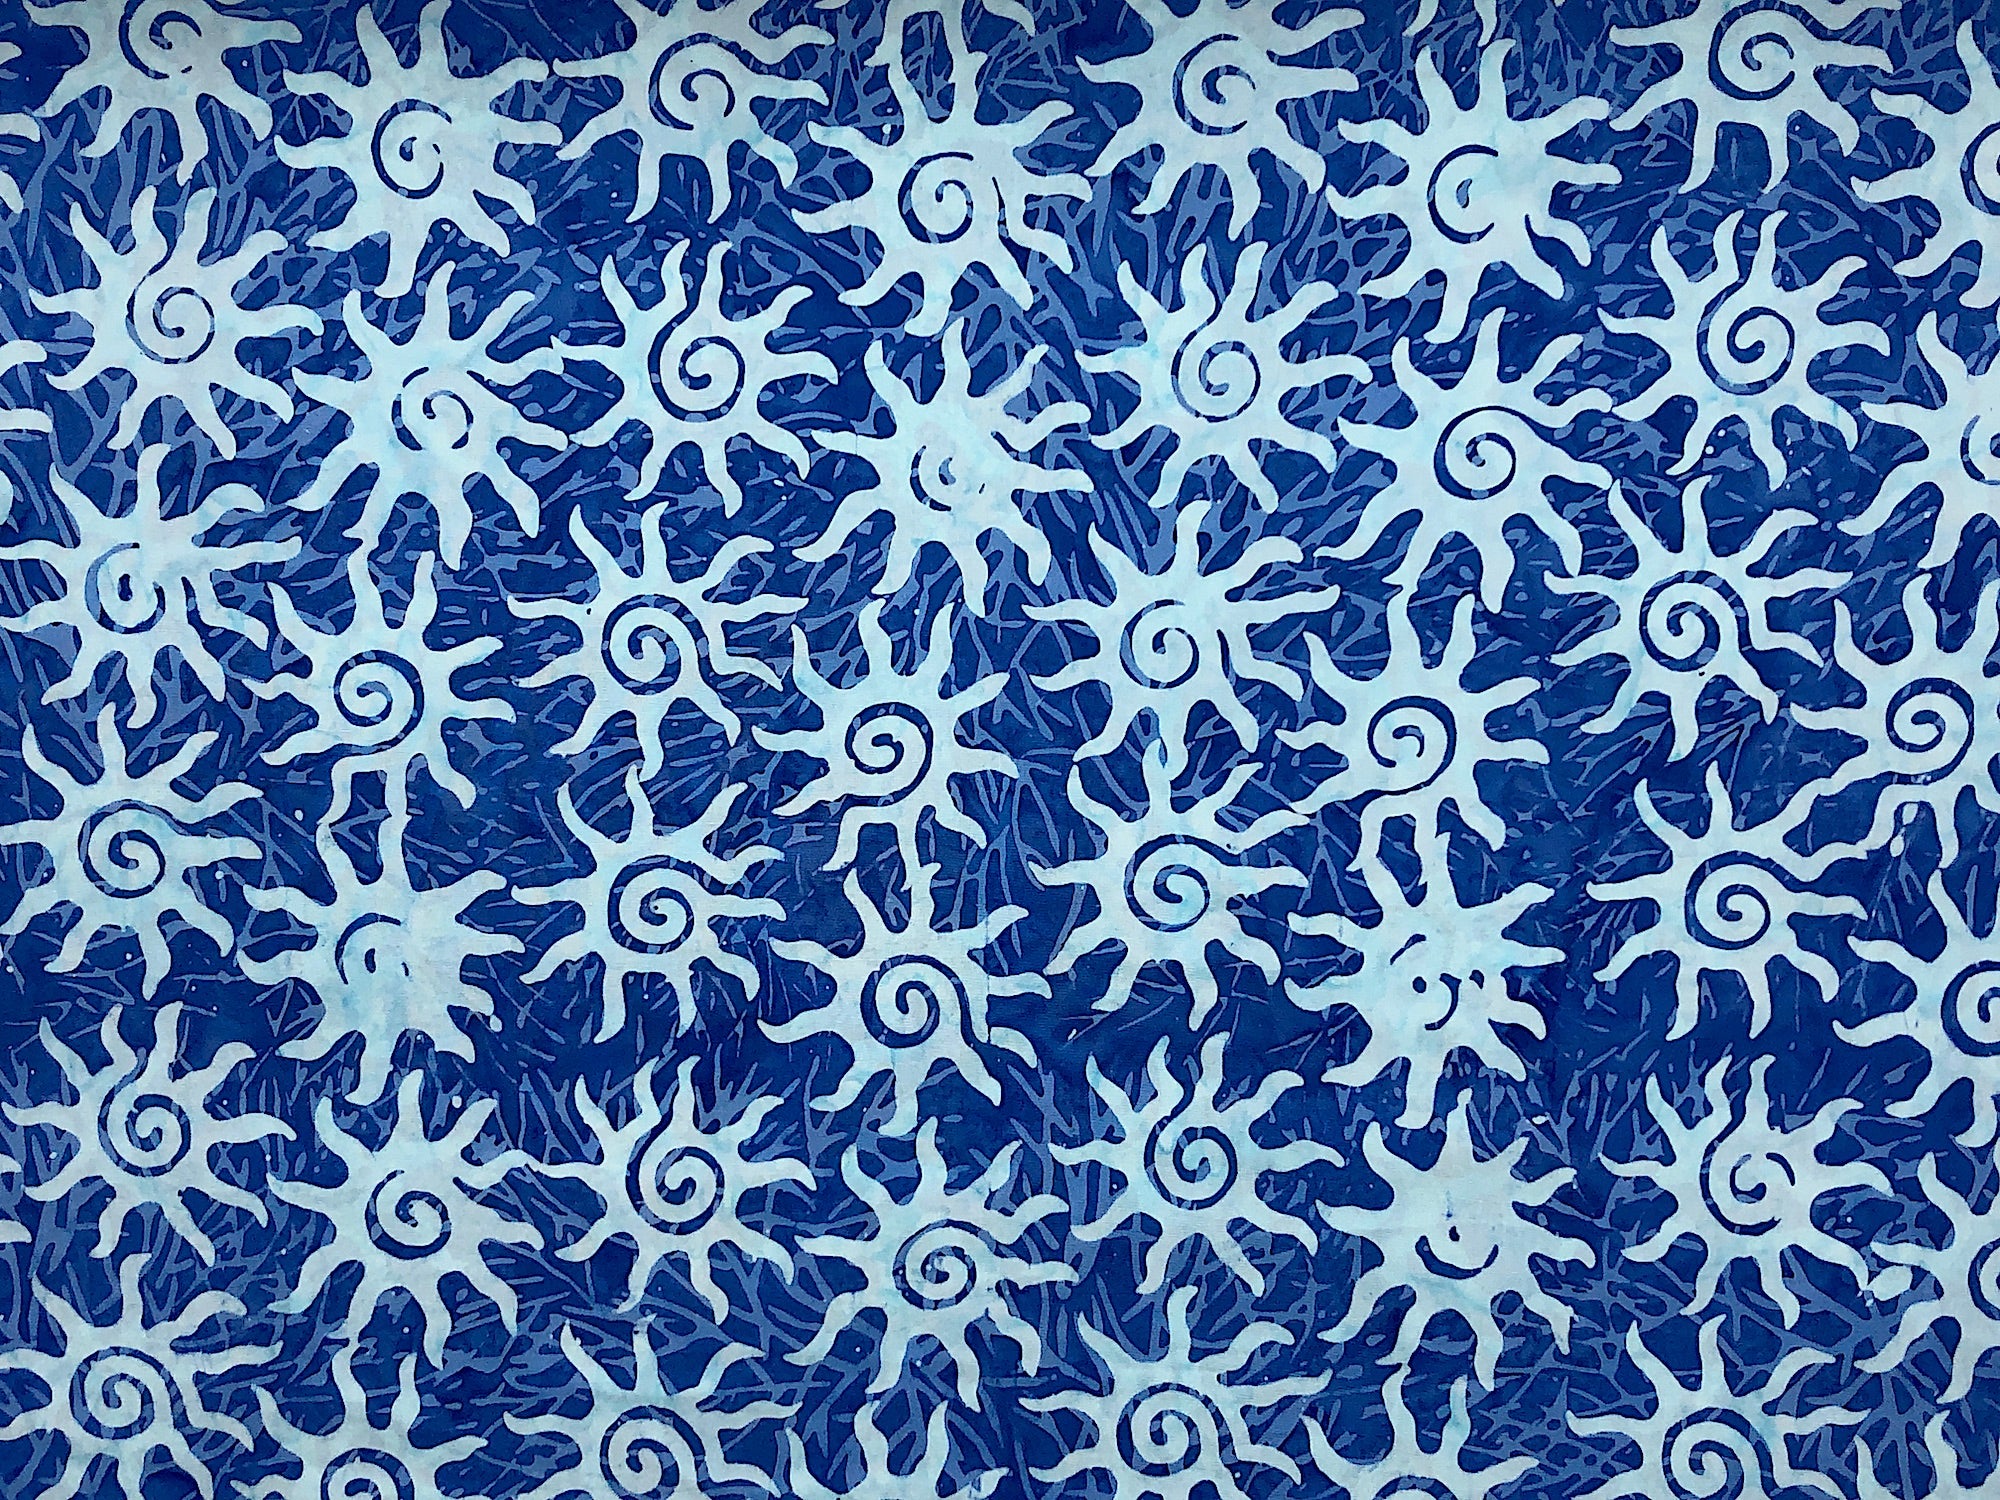 This blue Batik fabric is covered with light blue suns.